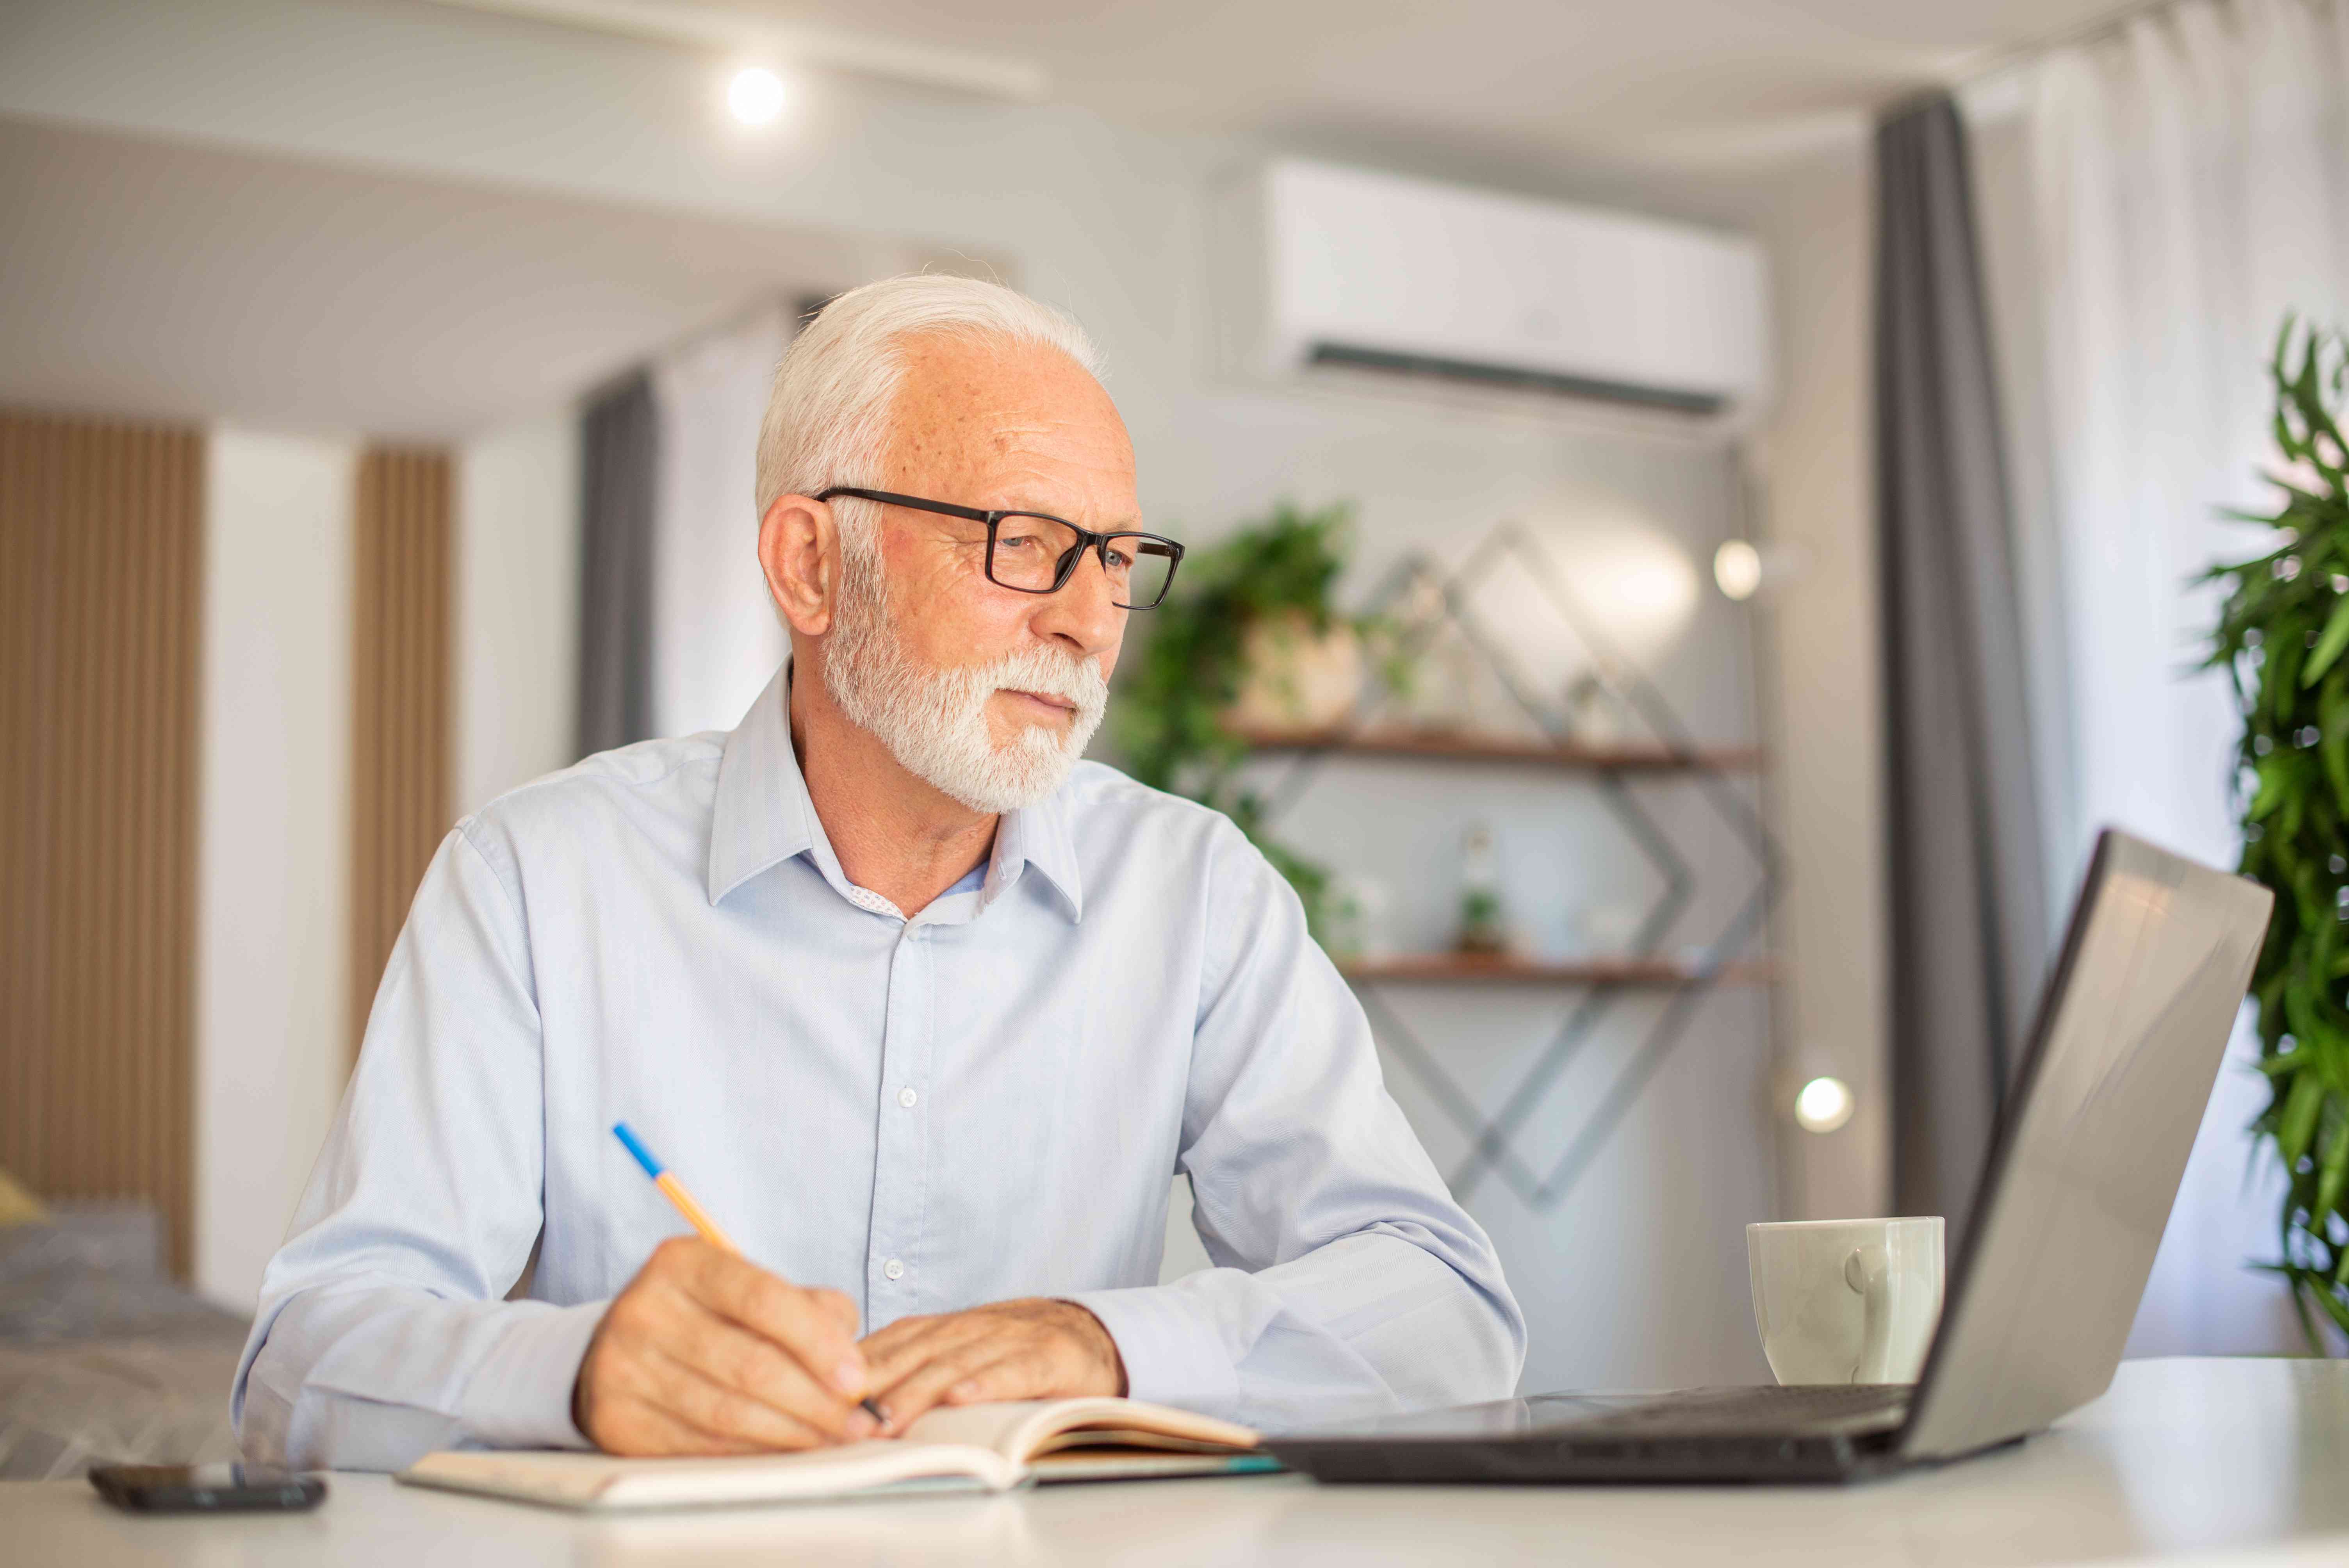 Older man sitting at his kitchen table looking at a laptop and jotting notes in a notebook